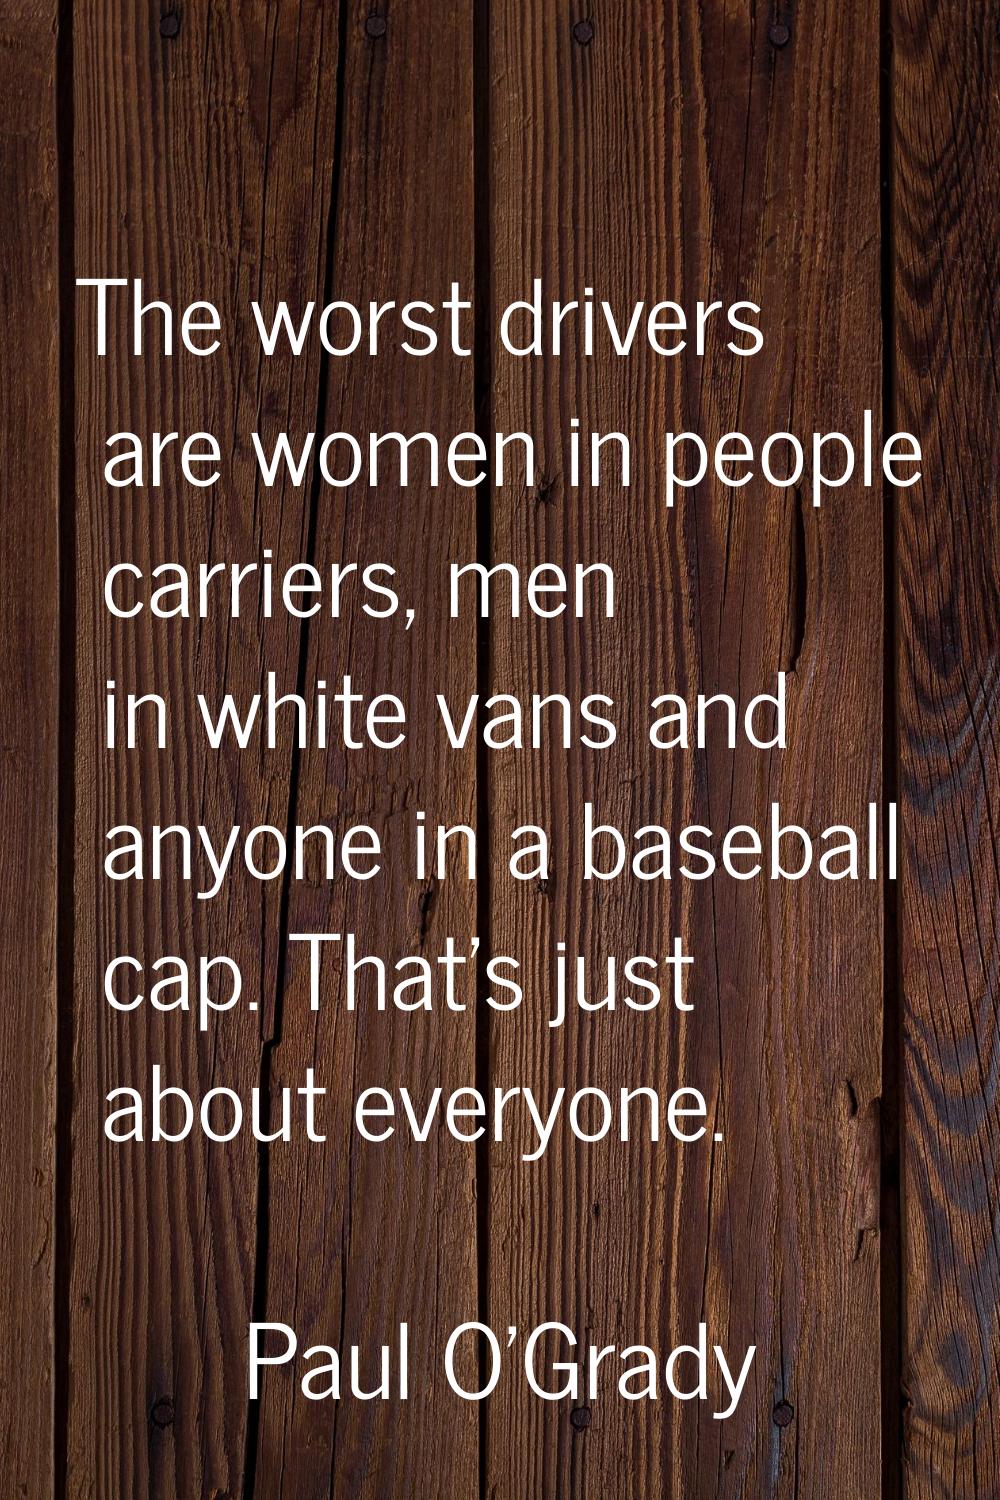 The worst drivers are women in people carriers, men in white vans and anyone in a baseball cap. Tha